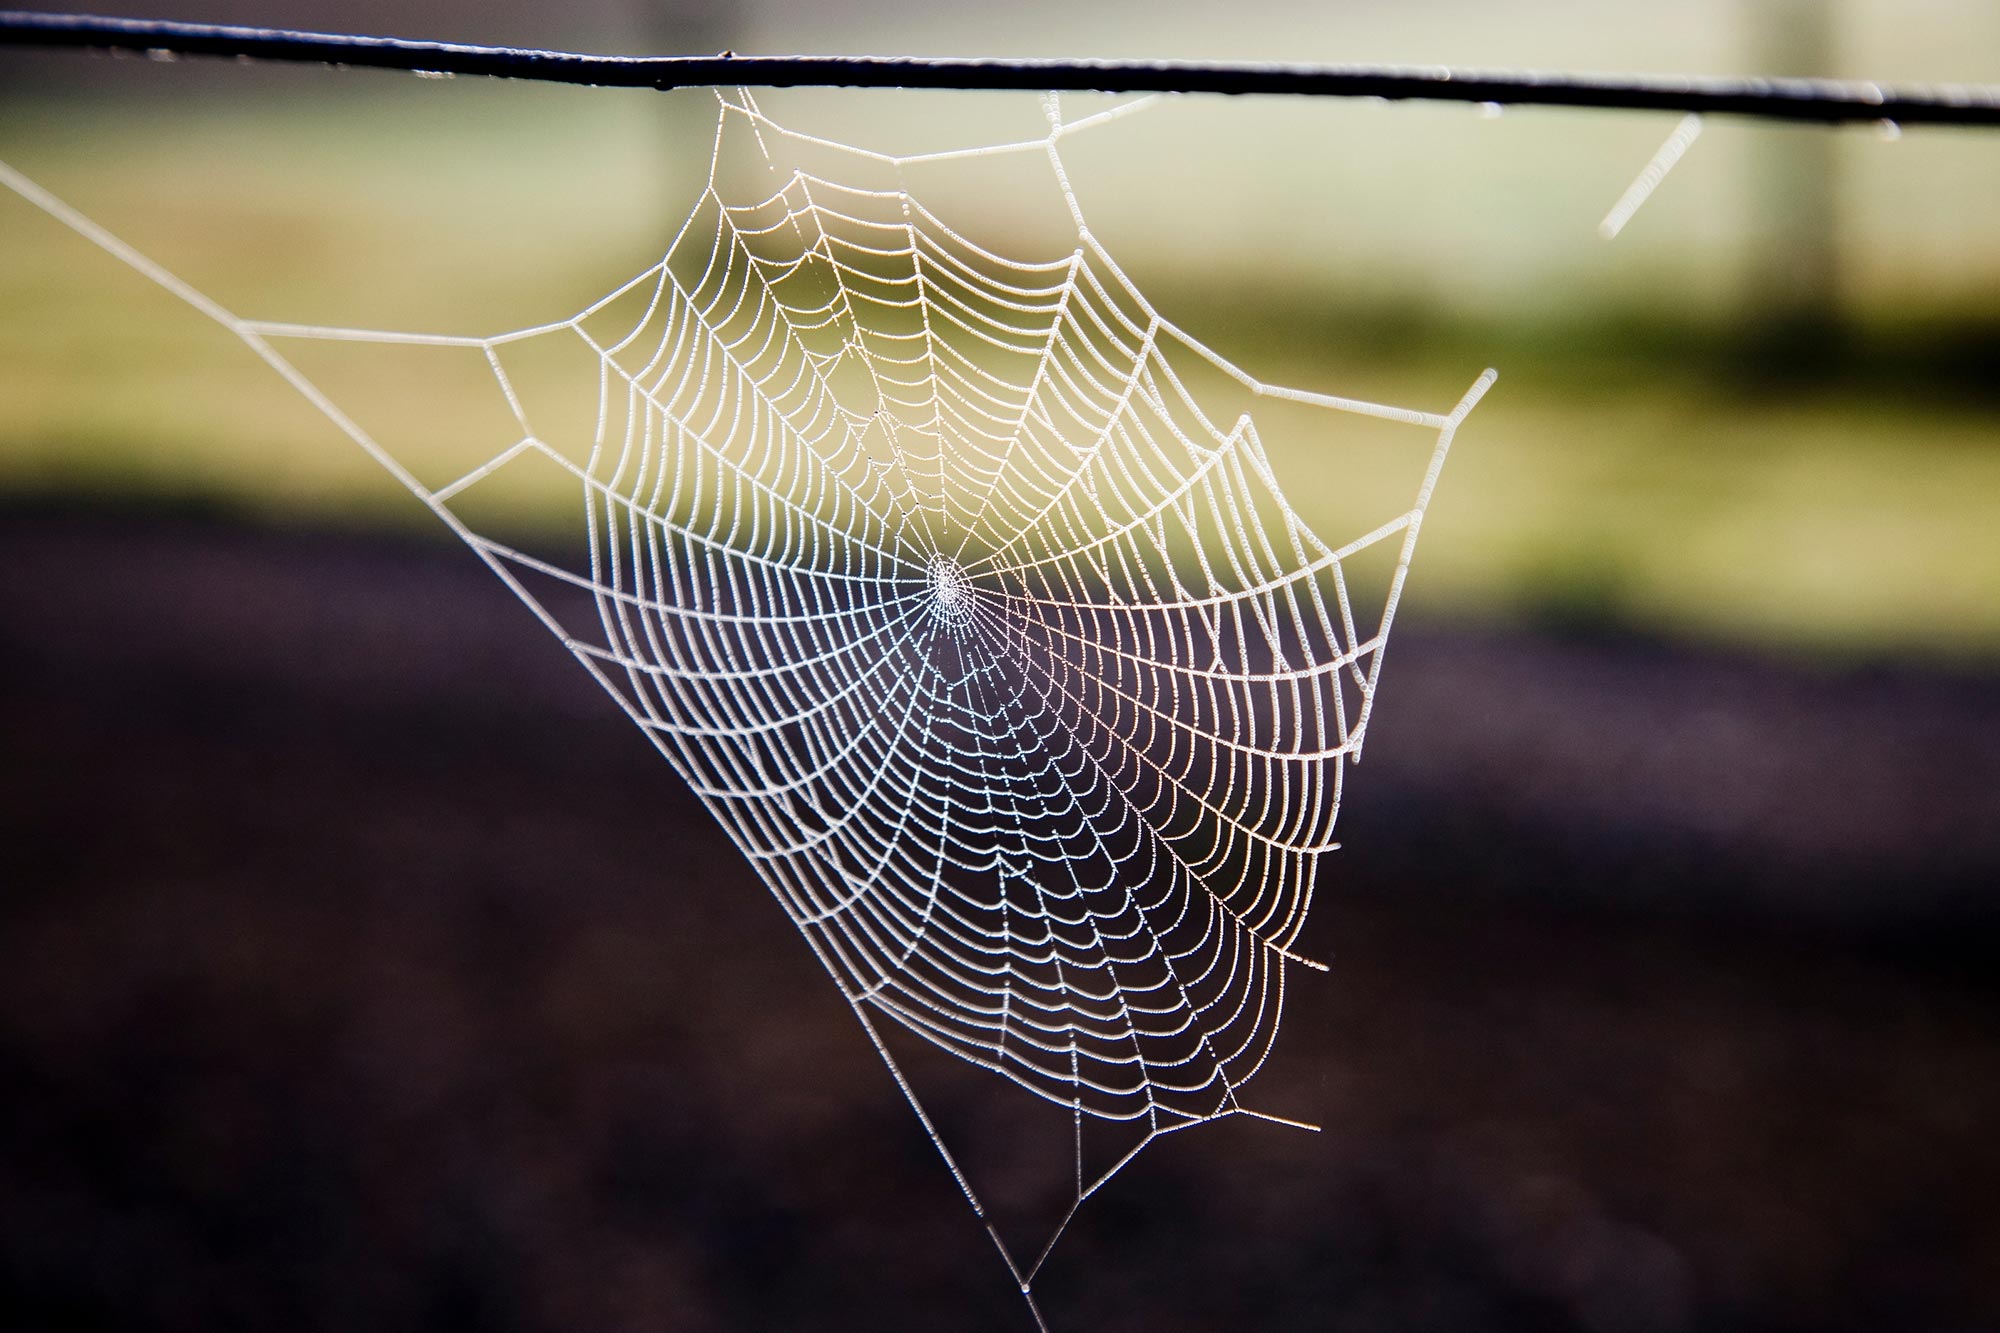 Spider Silk Is Supposed To Have “Healing Properties” – Scientists Debunk  the Myth